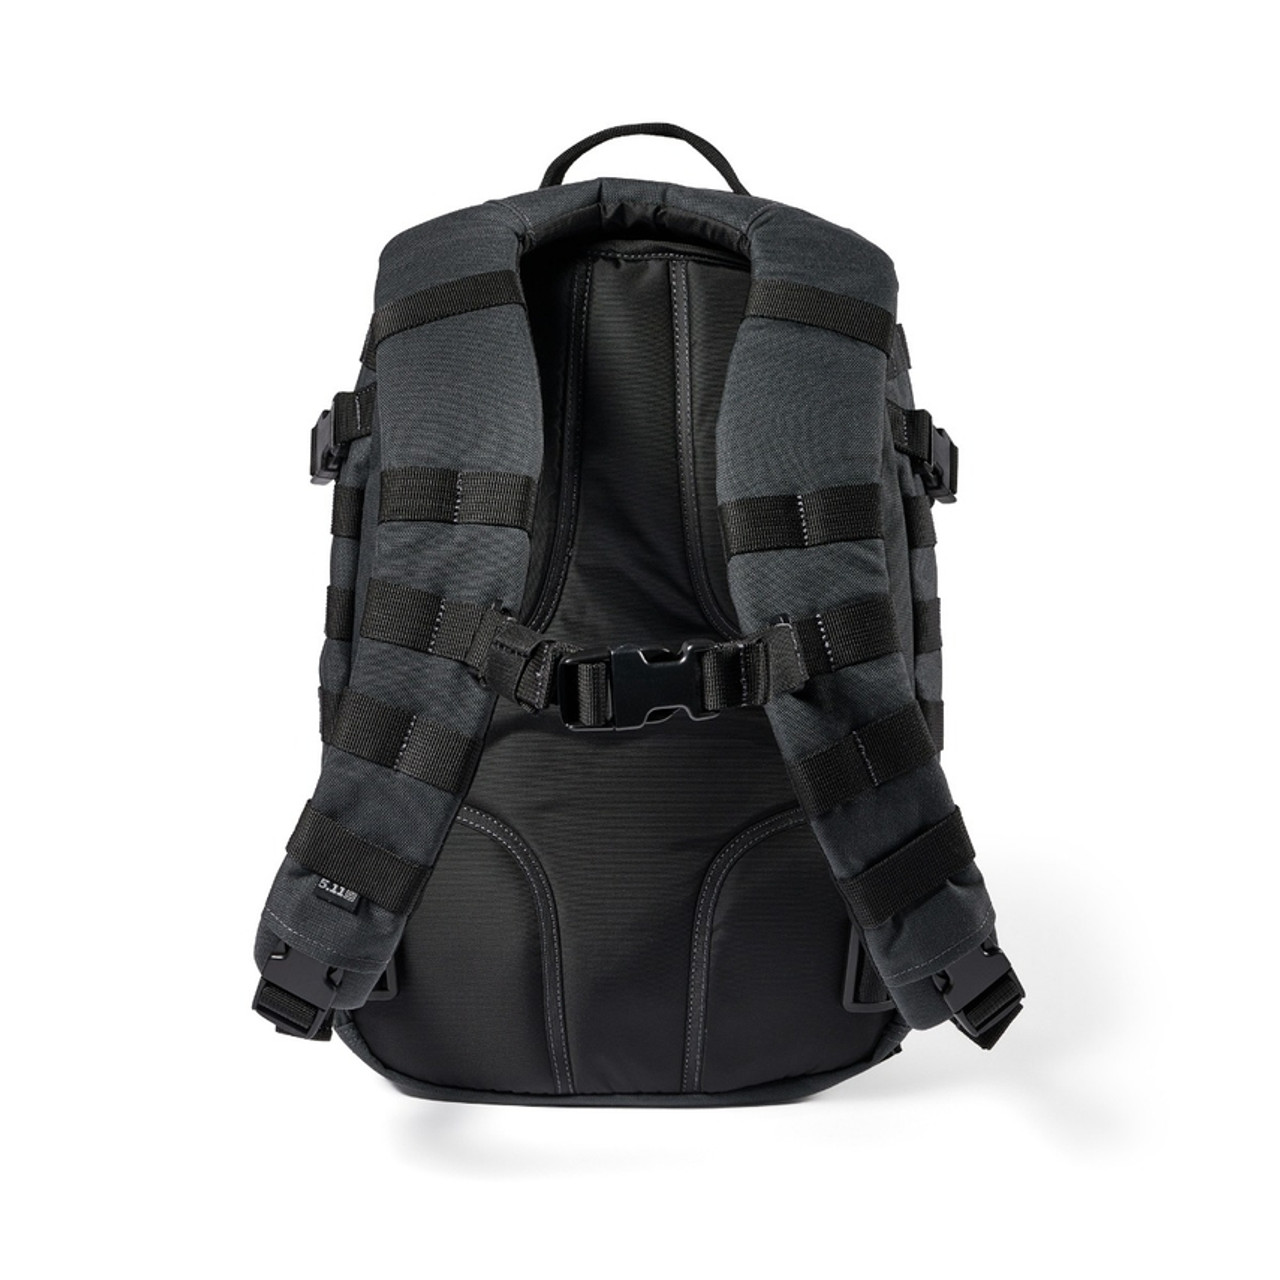 5.11 Tactical RUSH 12 2.0, Adventure Backpack